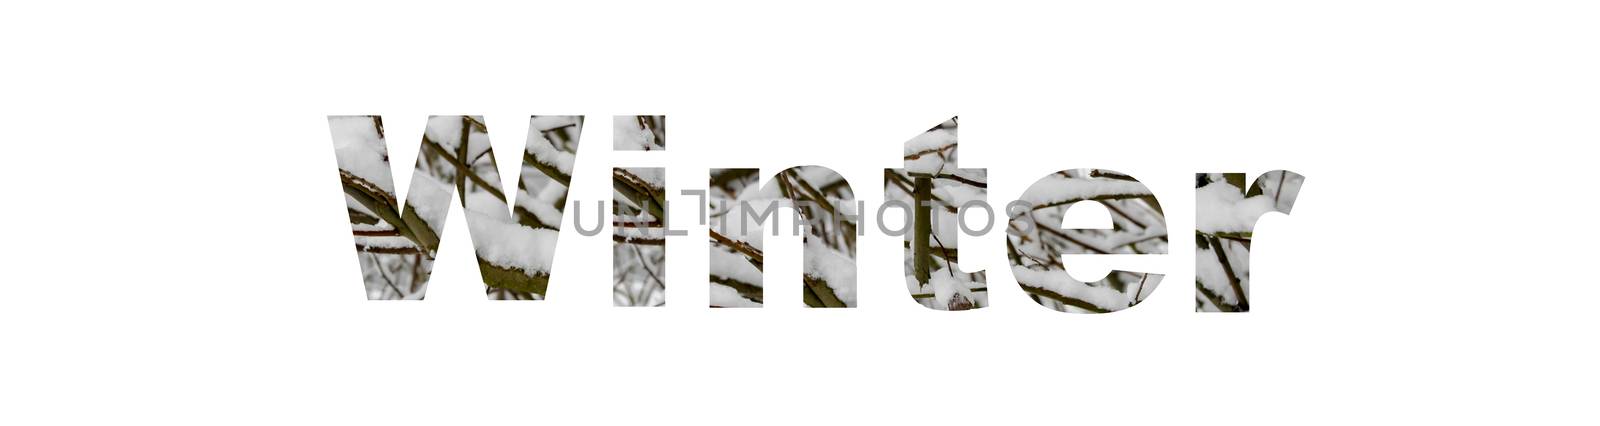 the word winter with images inside by compuinfoto